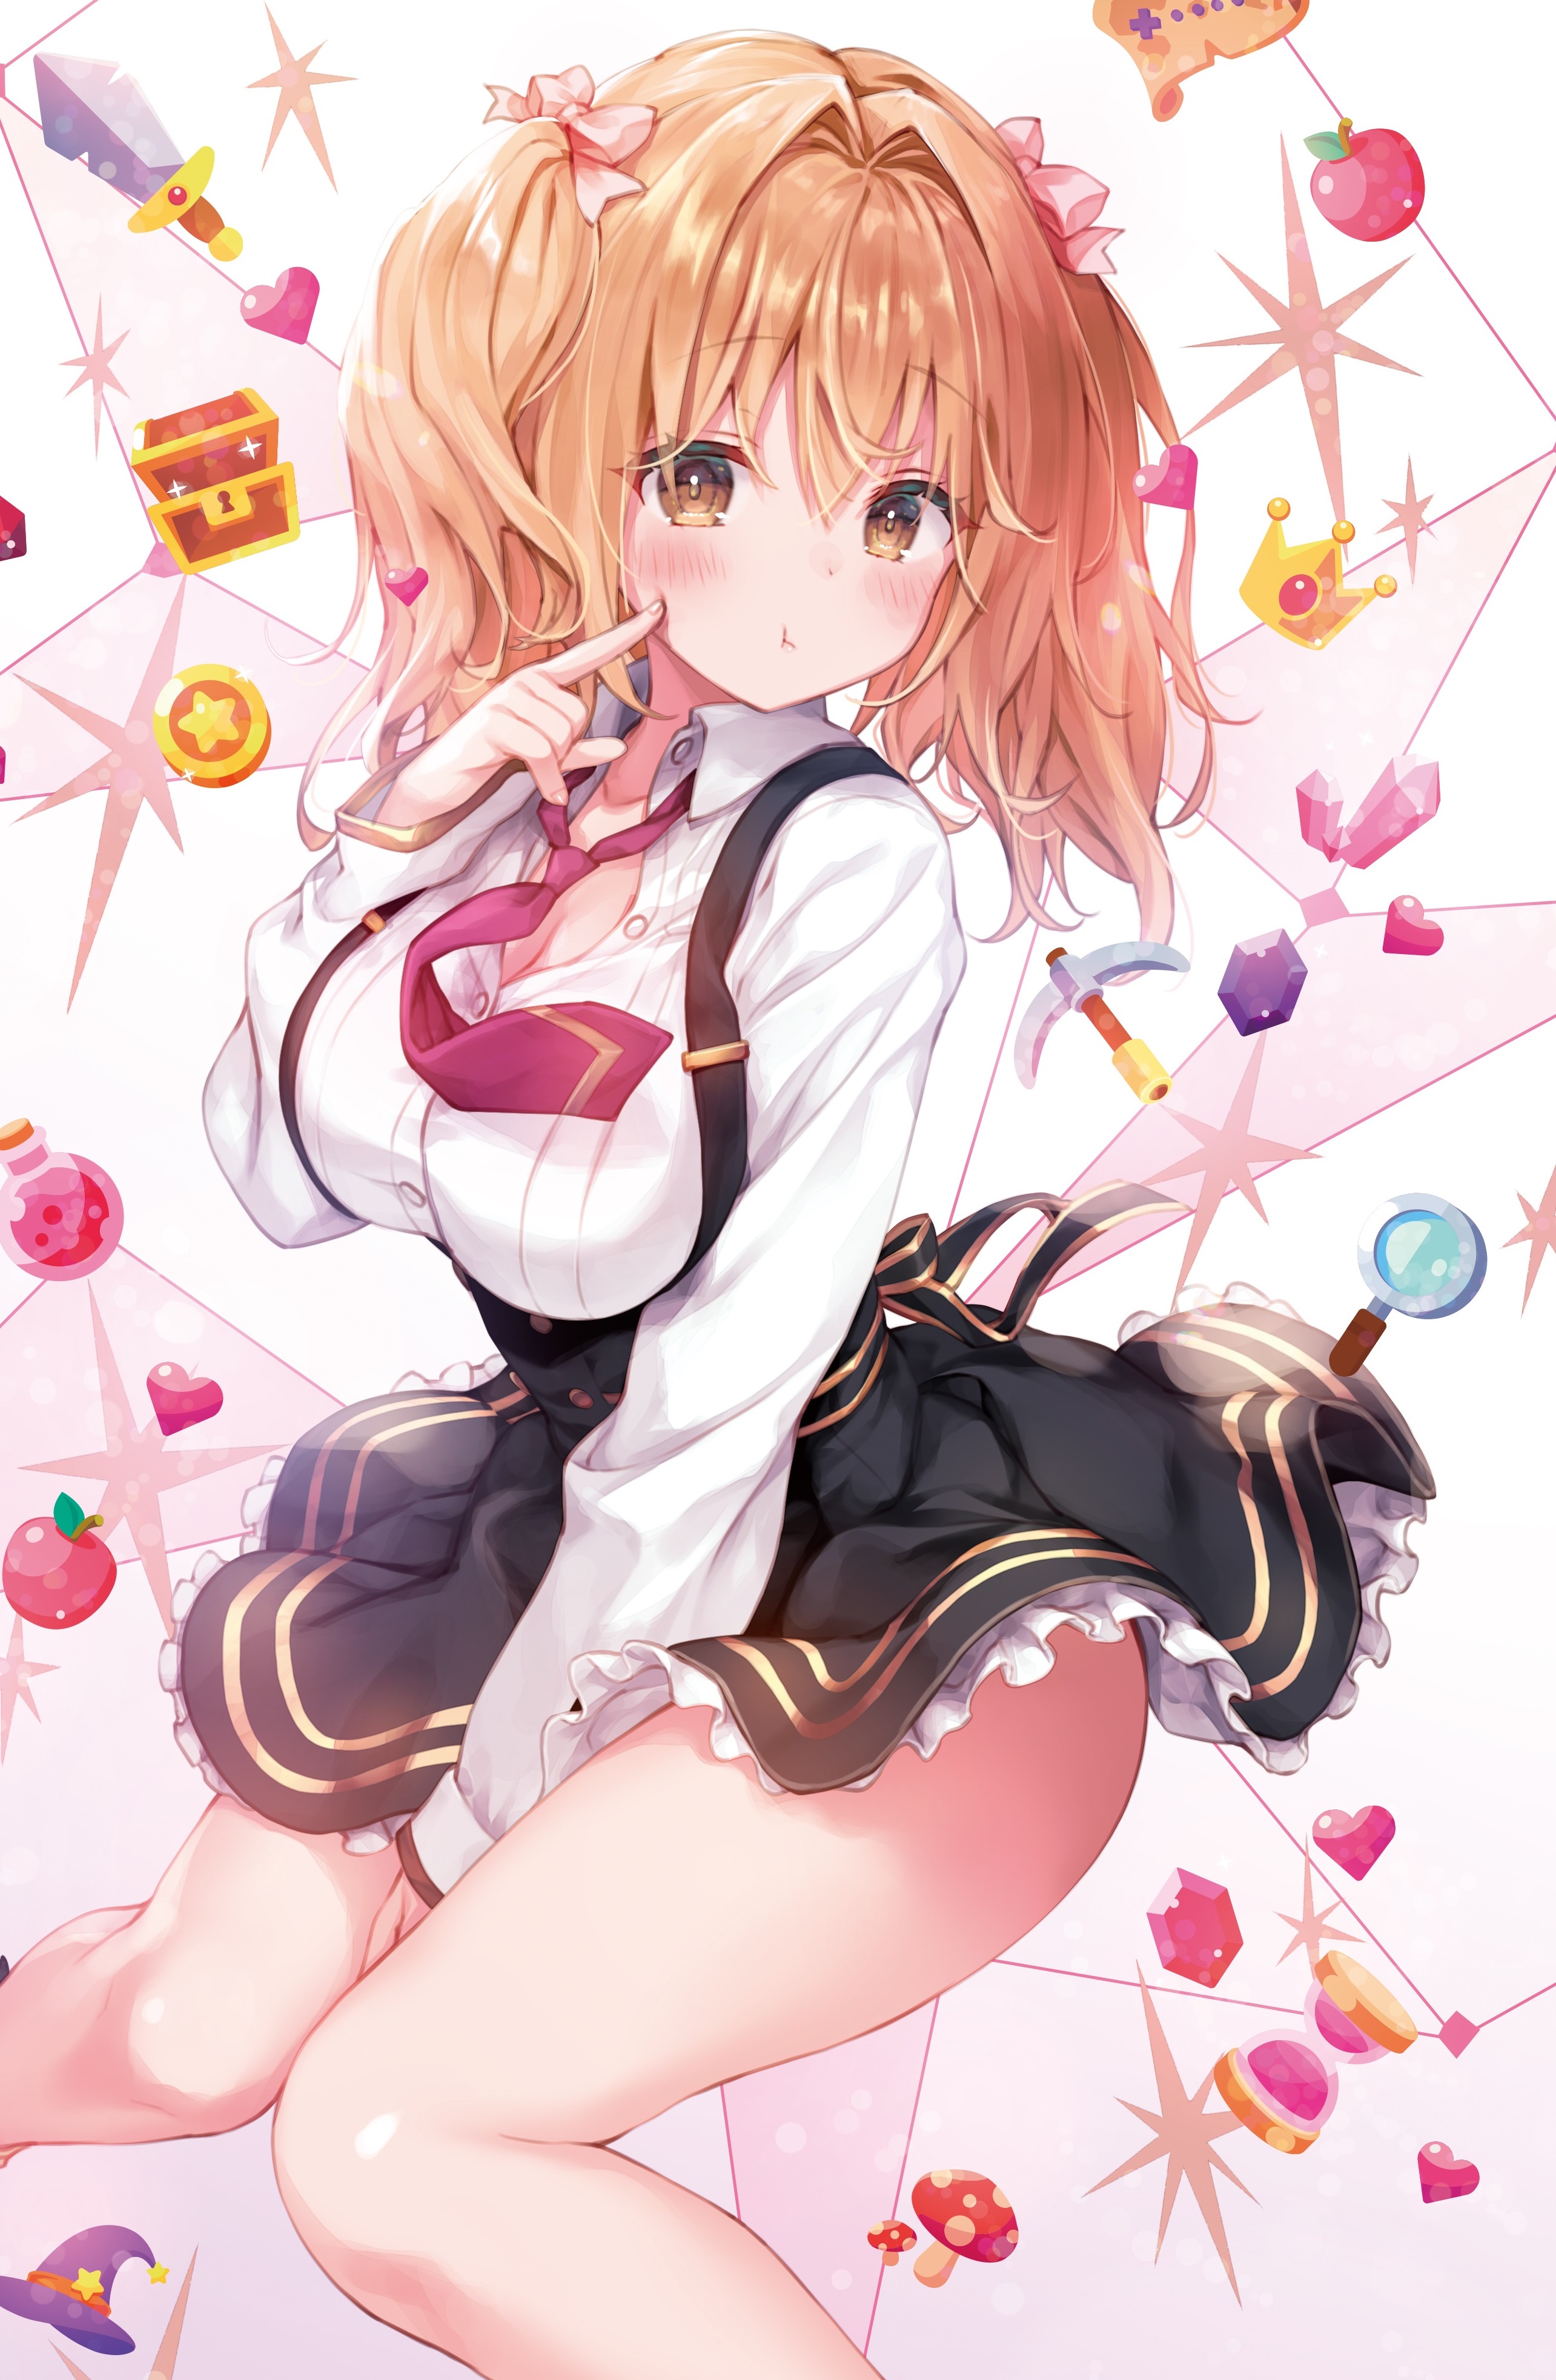 Anime 2569x3929 anime anime girls loli looking at viewer Konomi Noa Akizuki Liar Liar portrait display closed mouth blushing hair between eyes blonde yellow eyes collarbone hand(s) between legs coins crown heart (design) sword treasure chest crystal  magnifying glass apples hourglasses legs thighs dress bent legs hair bows stars witch hat mushroom fruit tie